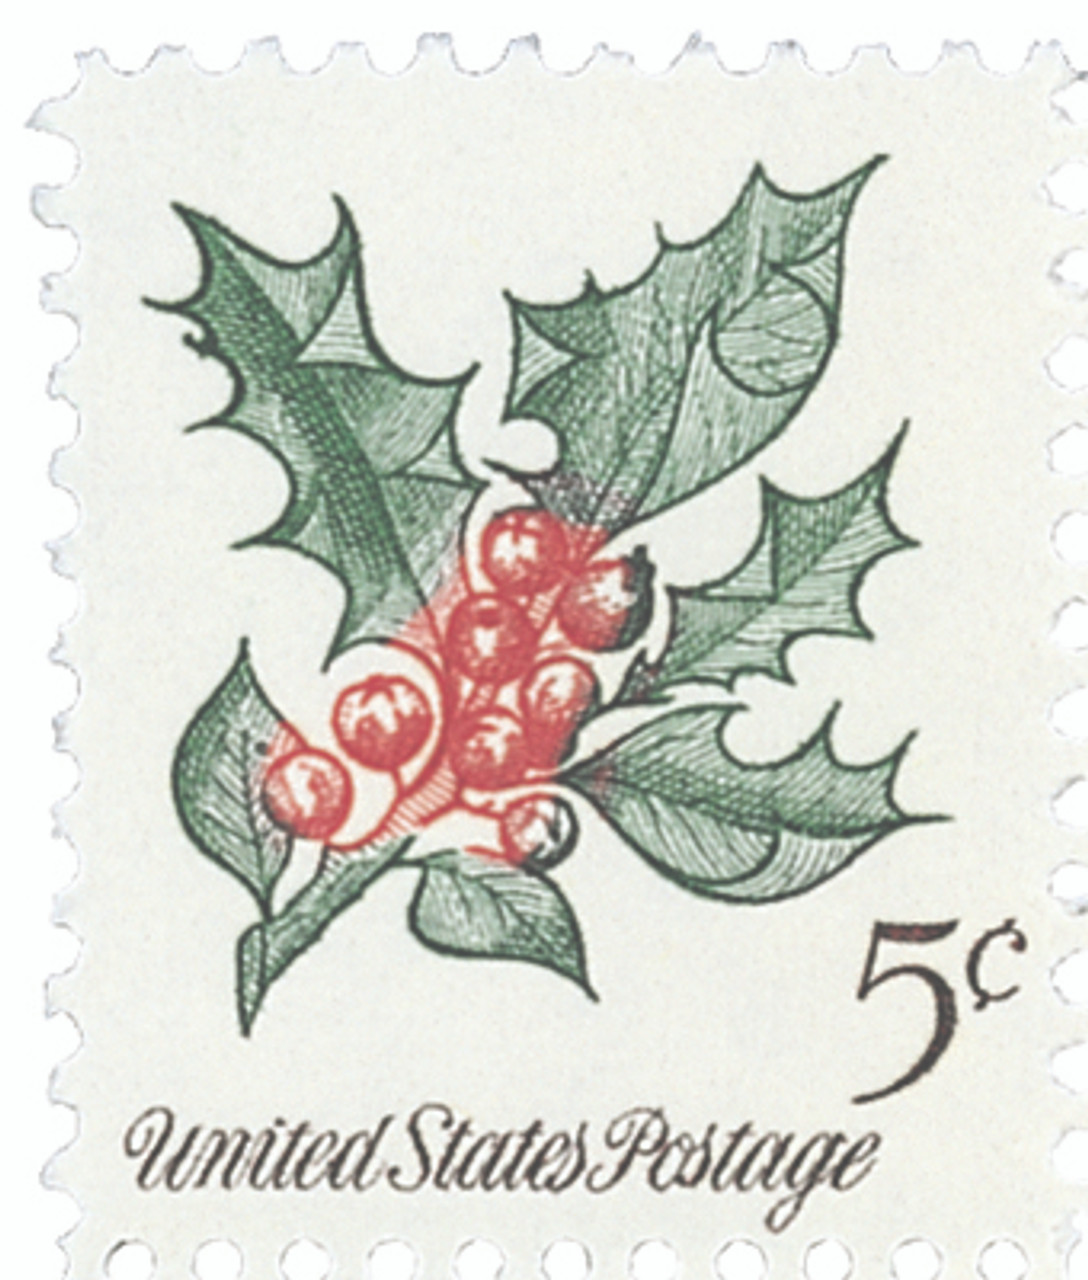 1254 - 1964 5c Christmas Holly - Mystic Stamp Company